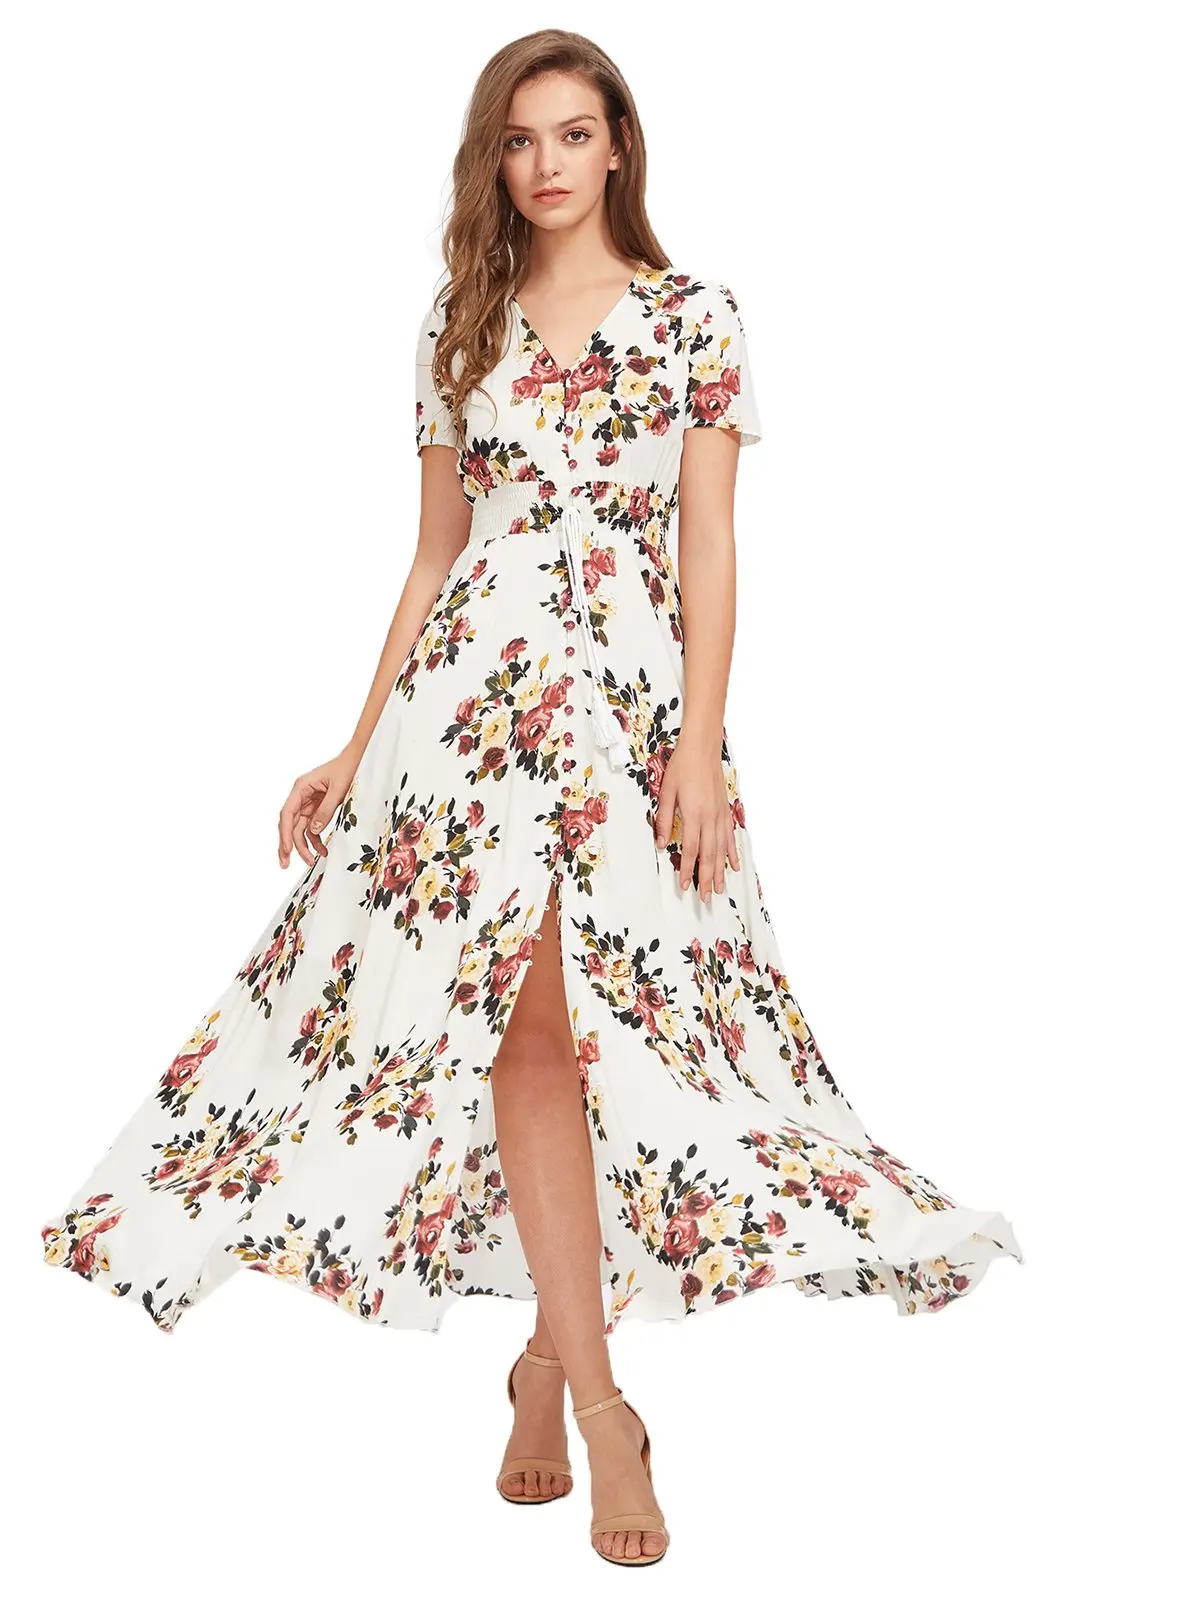 Buy Milumia Womens Boho Button up Split Floral Print Flowy Party Dress in  Cheap Price on Alibaba.com